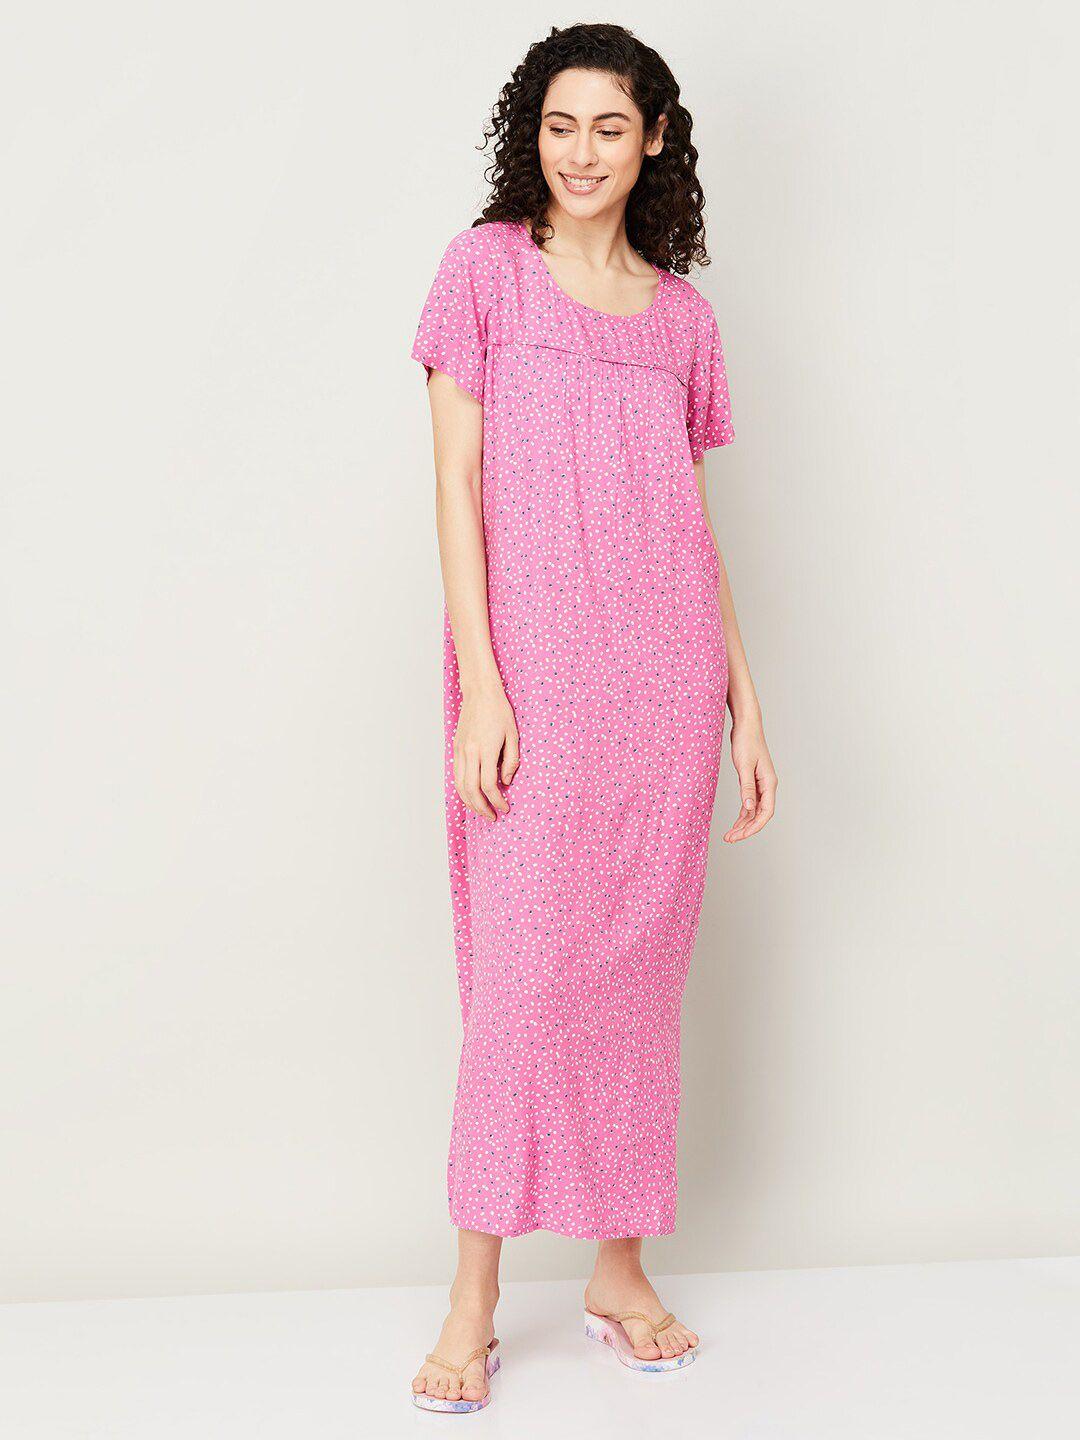 ginger by lifestyle floral printed nightdress